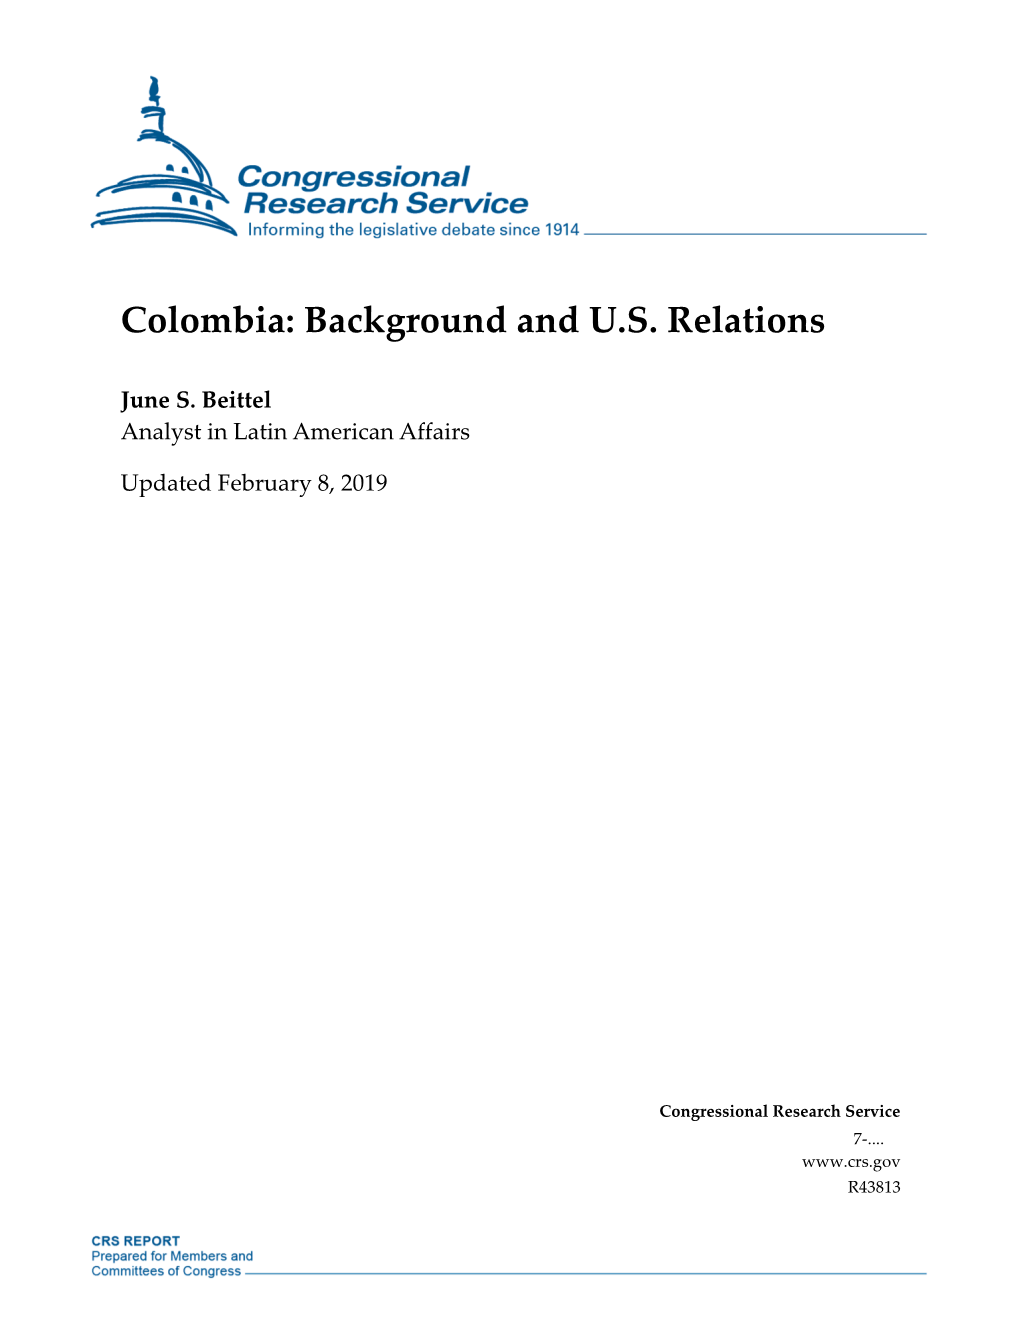 Colombia: Background and U.S